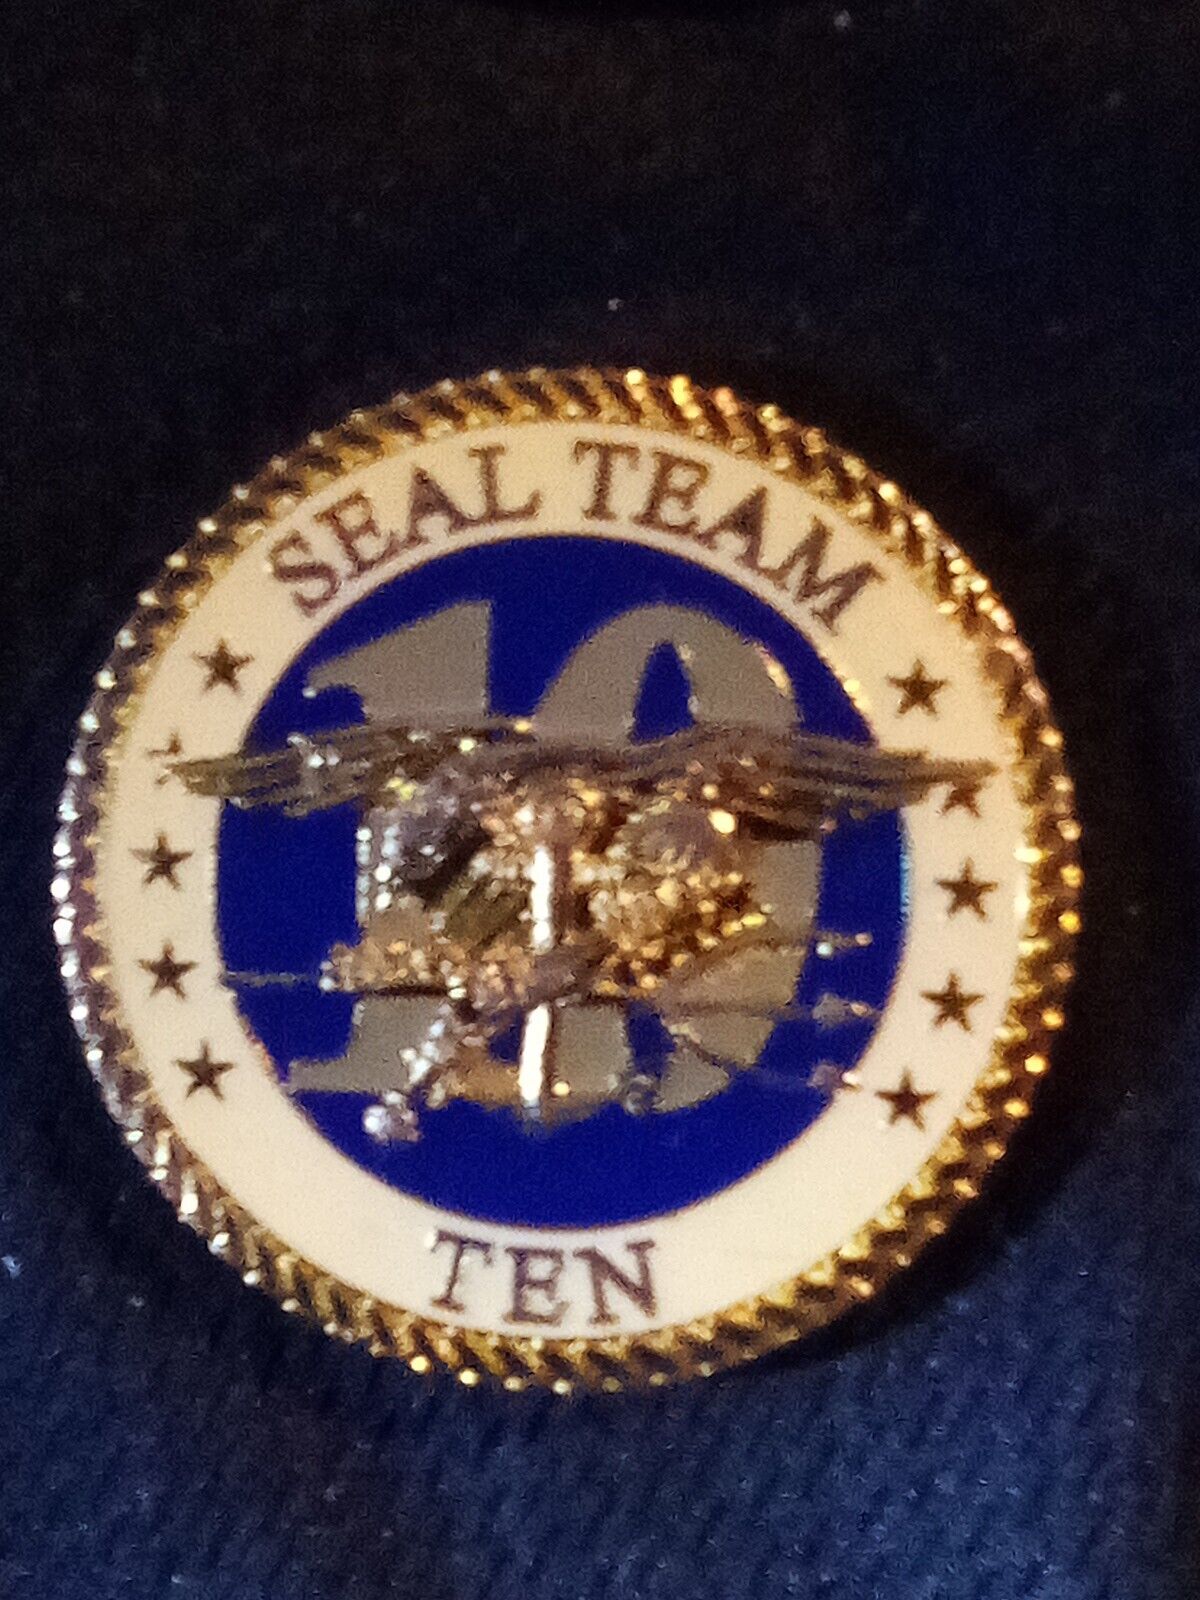 Original  NSW Navy Seal Squadron  Team 10 Challenge Coin Troop Military Rare